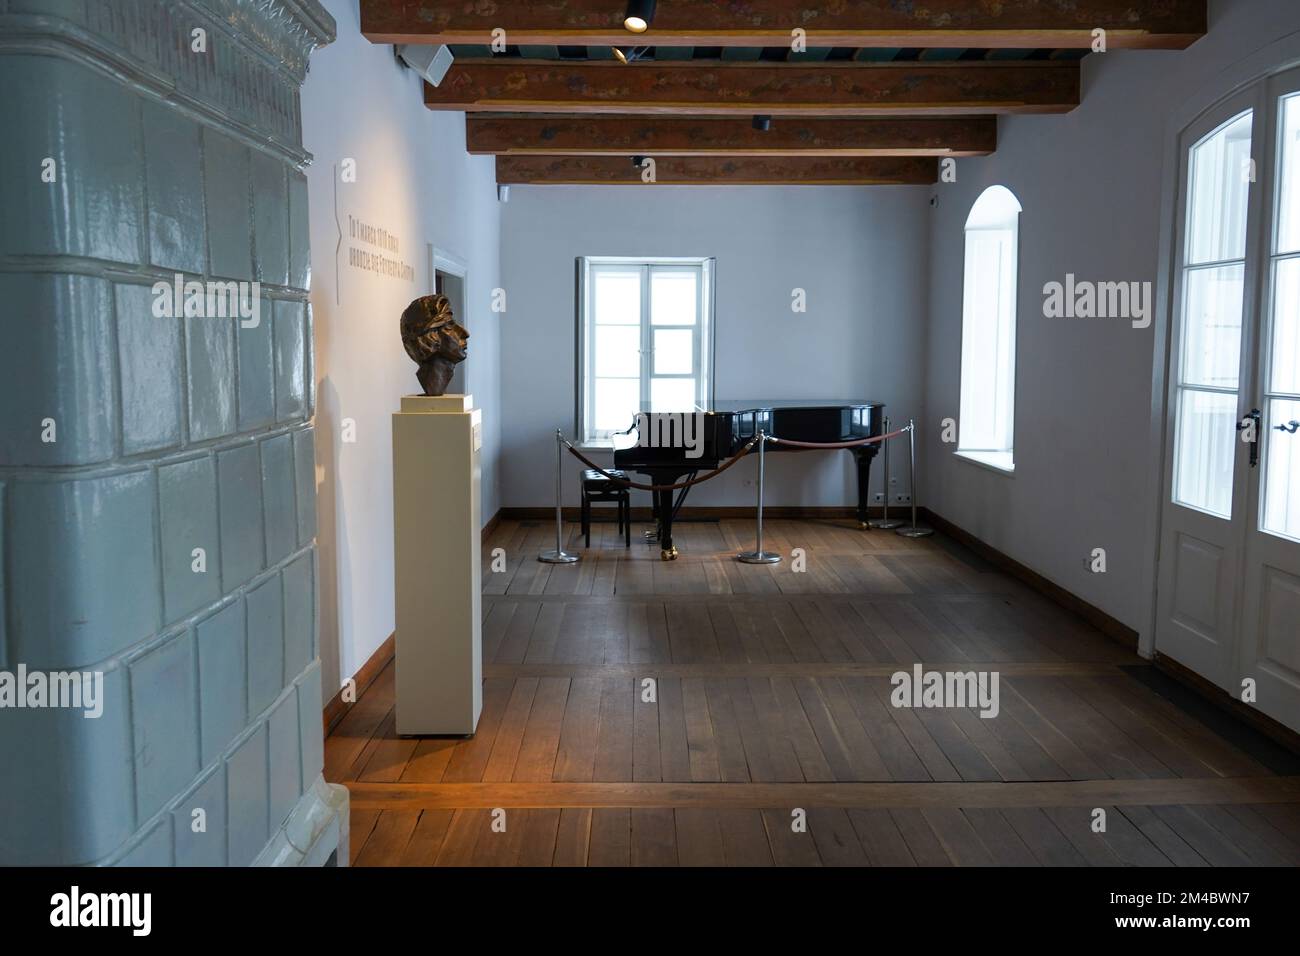 Room where Frederic Chopin was born in Birthplace of Chopin in Żelazowa Wola, Poland with bronze sculpture of composer head by Xavery Dunikowski Stock Photo